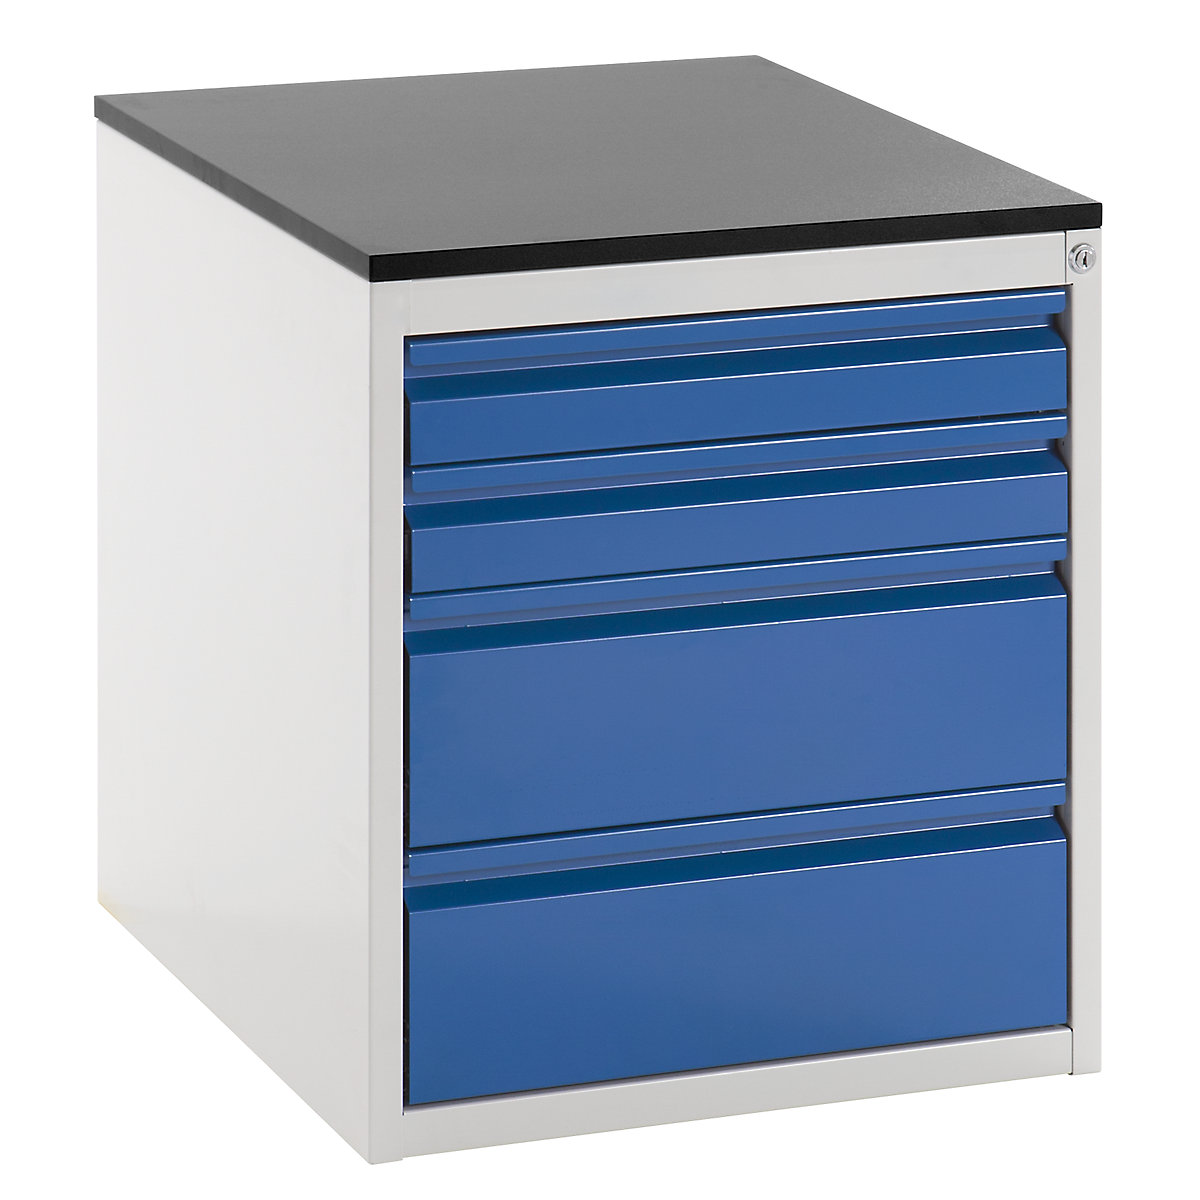 Drawer cupboard with telescopic guides – RAU, height 640 mm, drawers: 2 x 90, 2 x 180 mm, light grey / gentian blue, width 580 mm-2